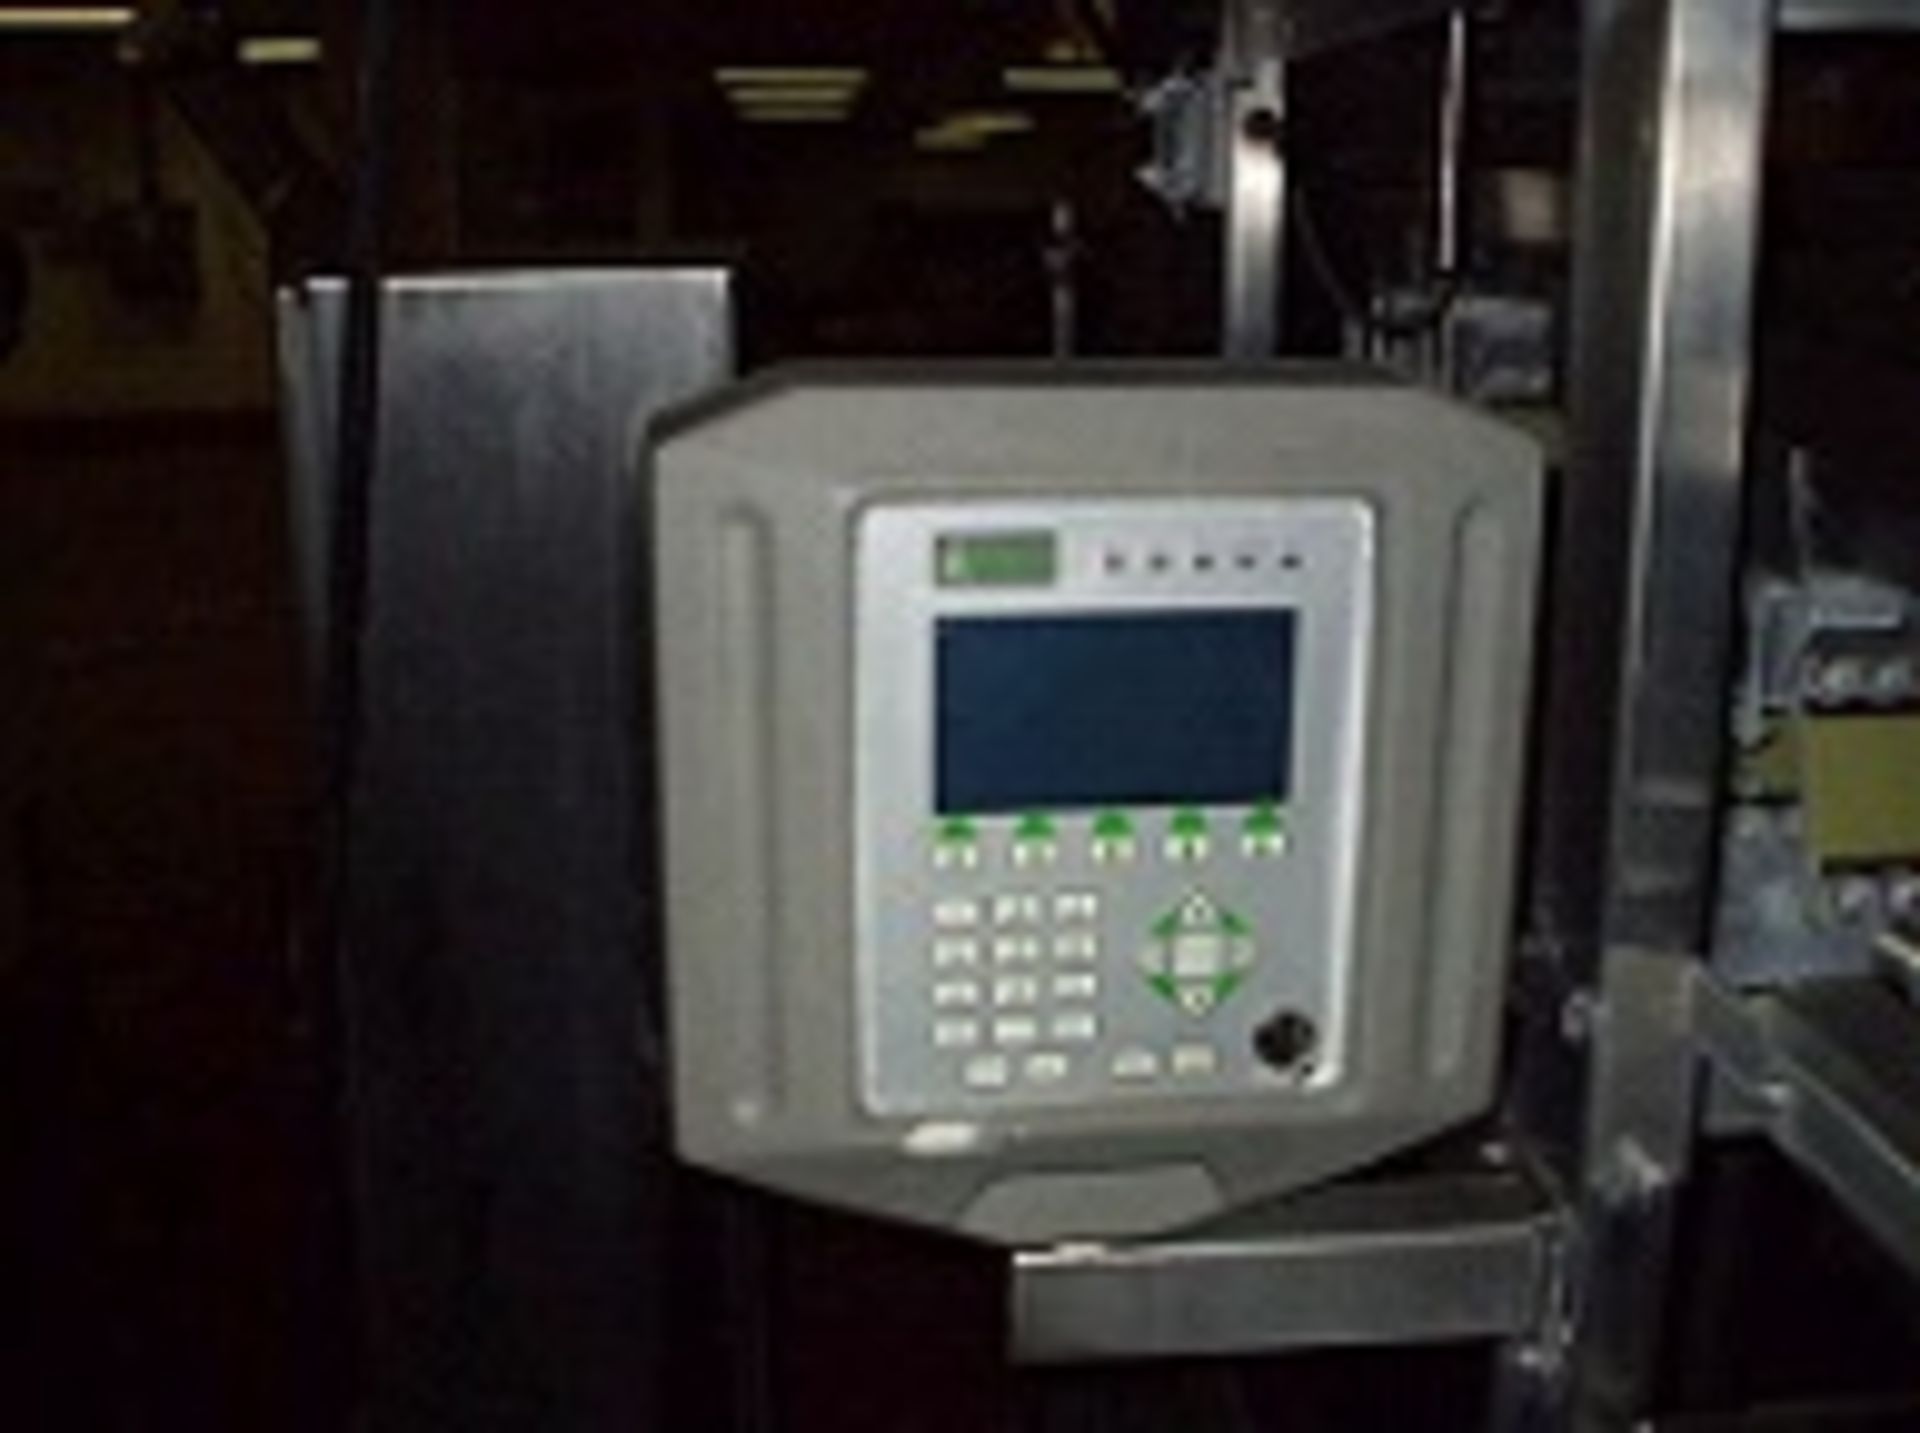 Liner Digitalis weighing system / weighing cell range  up to 10,000 grams, - Image 4 of 5